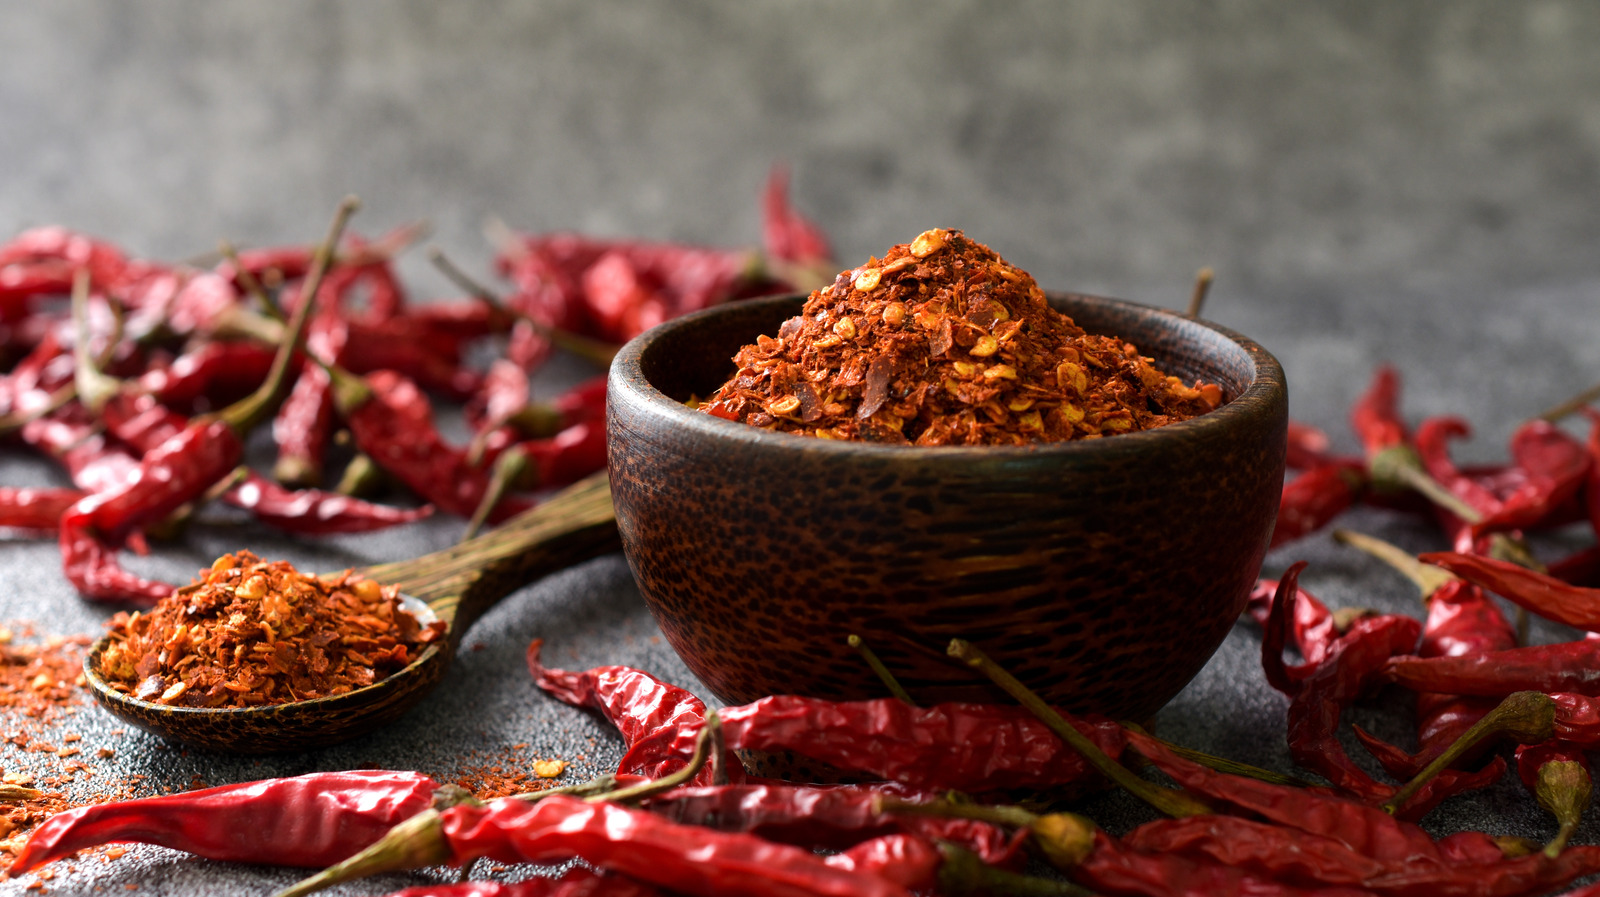 Most Of The World's Chili Peppers Come From This Country